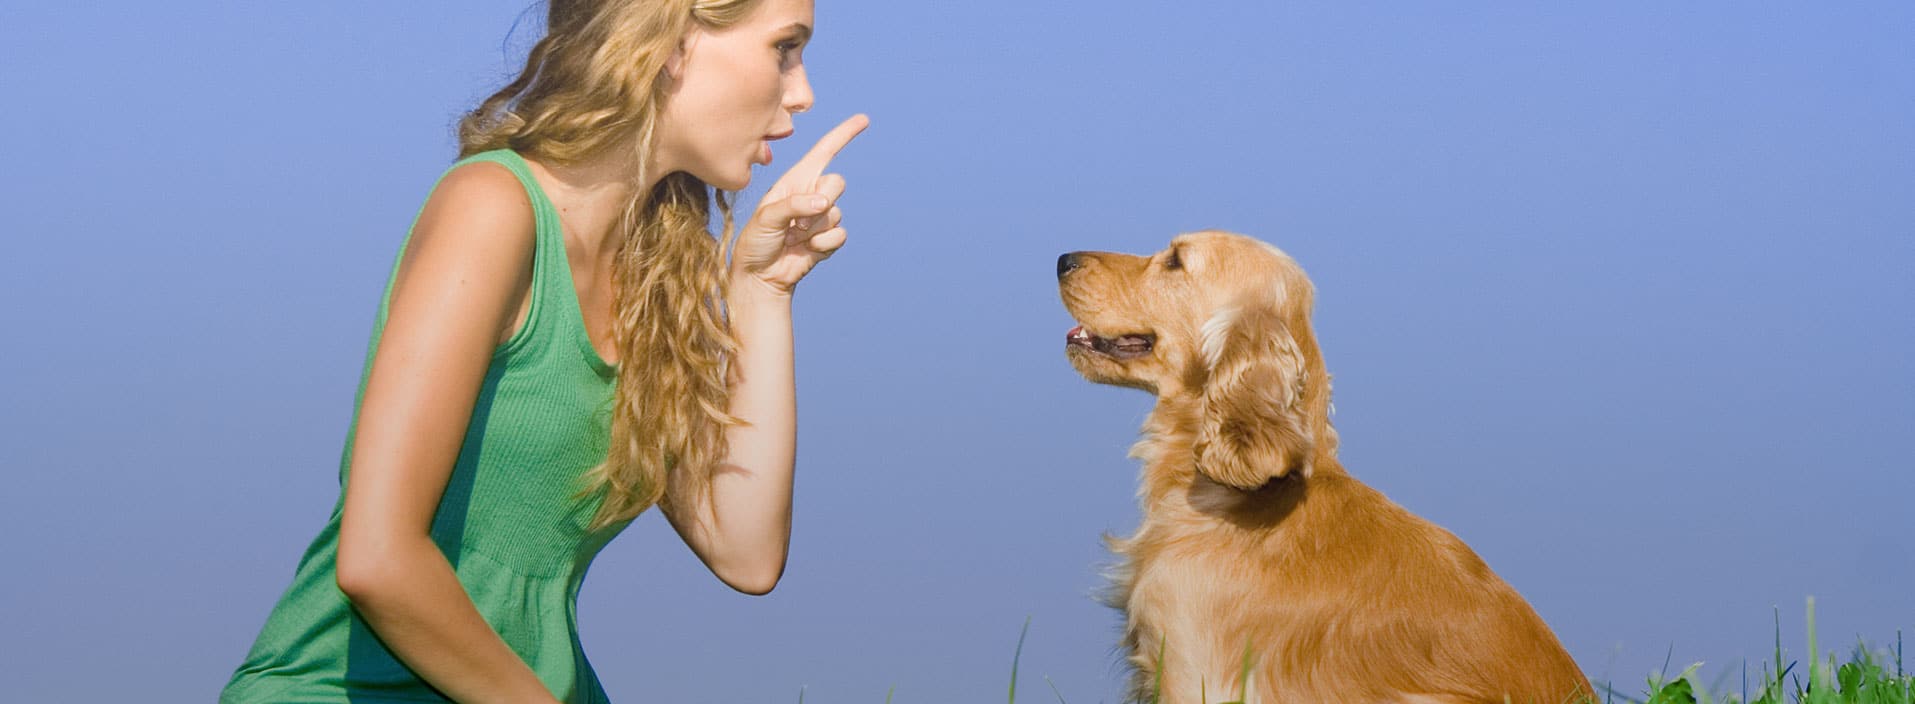 Everything You Need to Know About Animal Communication - Start Here